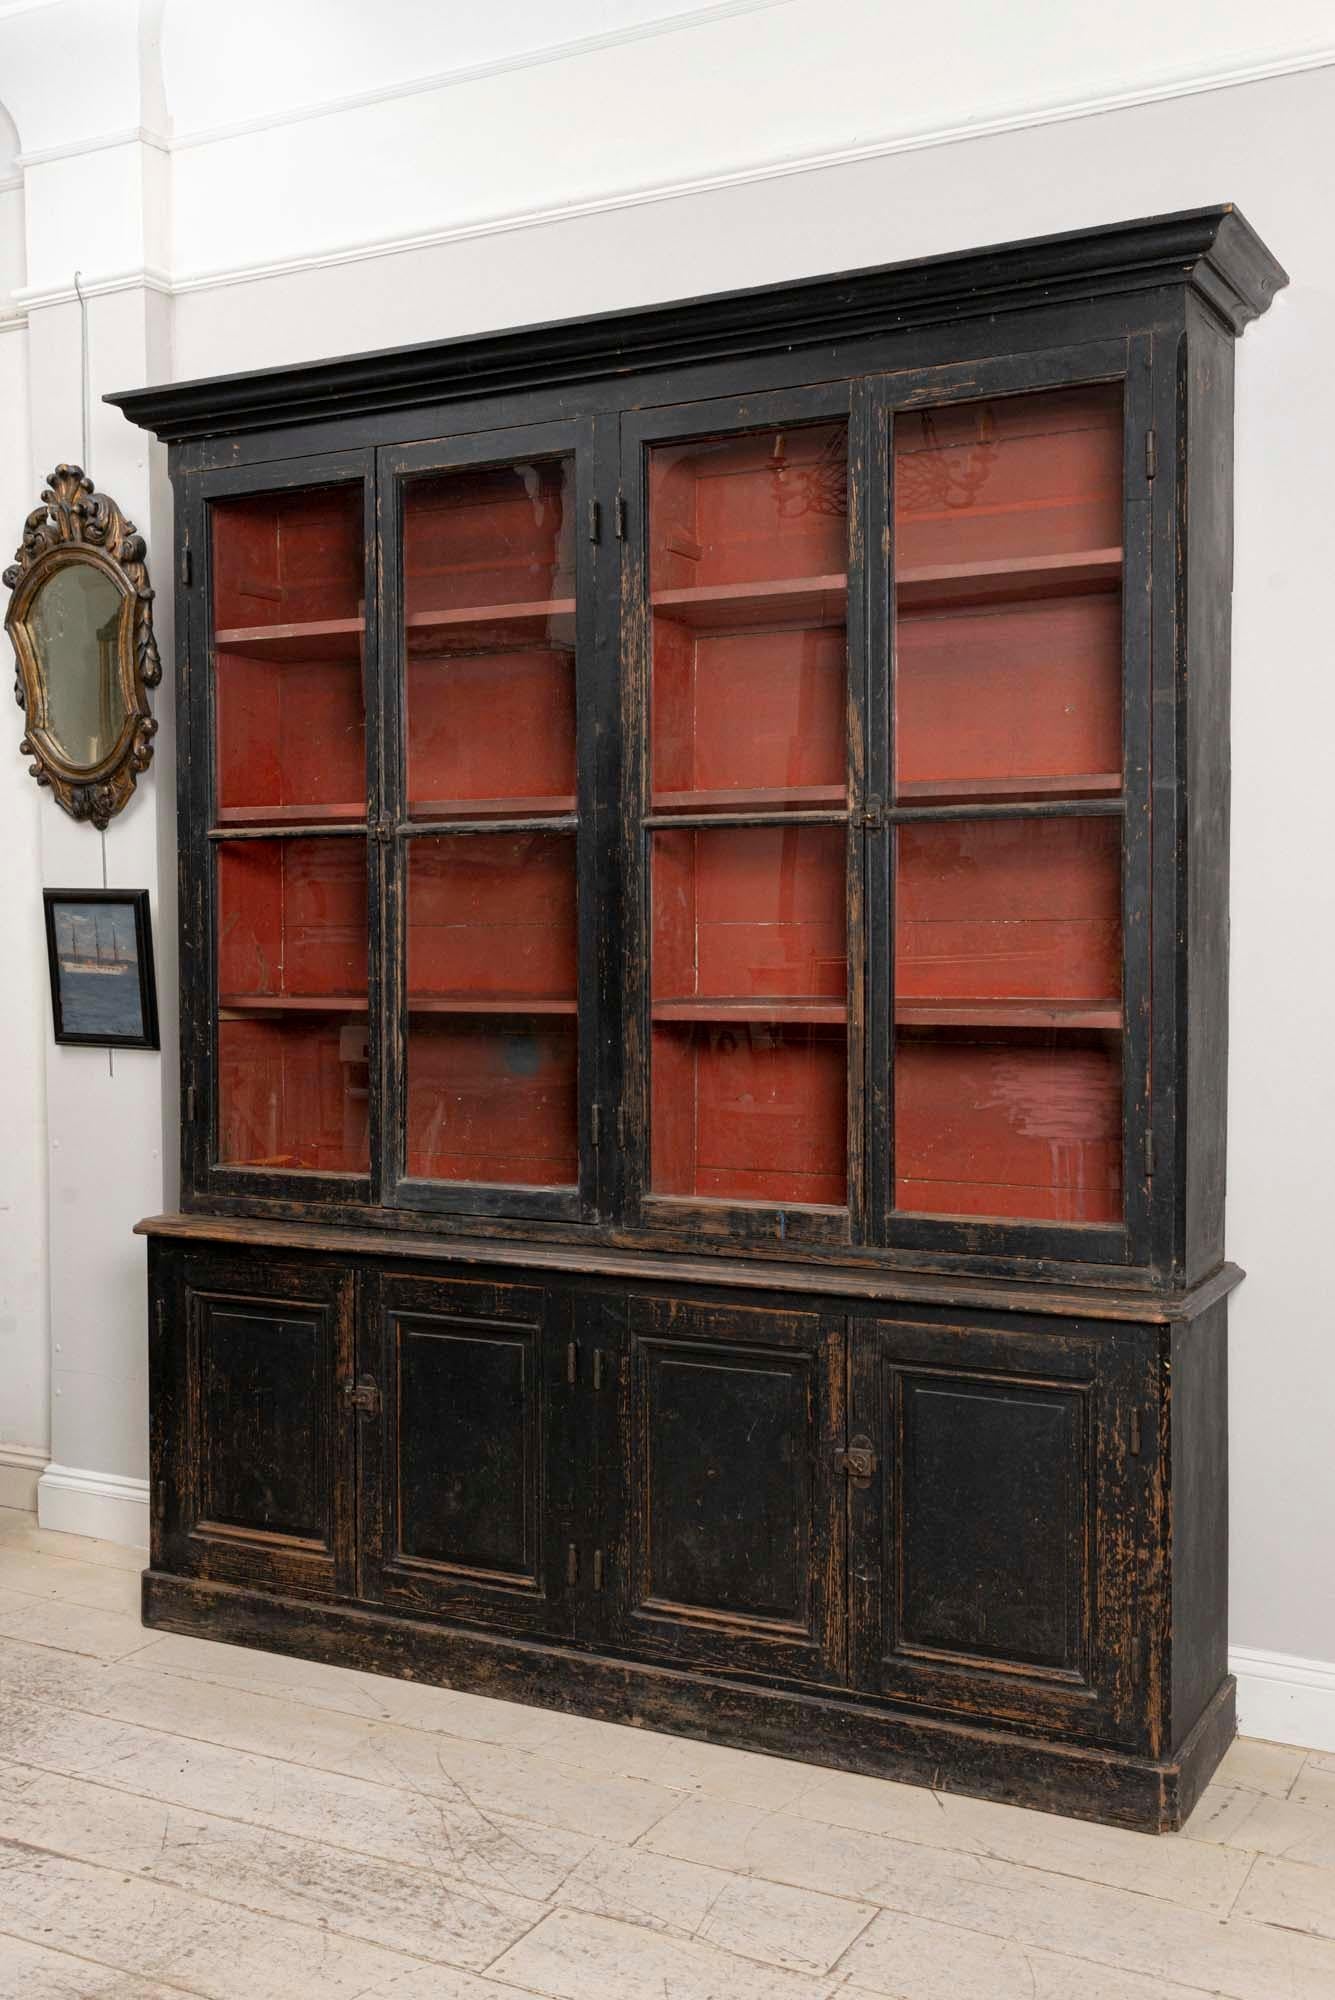 French black painted bookcase, in the 'moderne' style, circa 1890s.
The original exterior black paint was complimented later with a warm deep burgundy interior finish which sits behind four glazed doors.
The bookcase is of handsome slightly taller